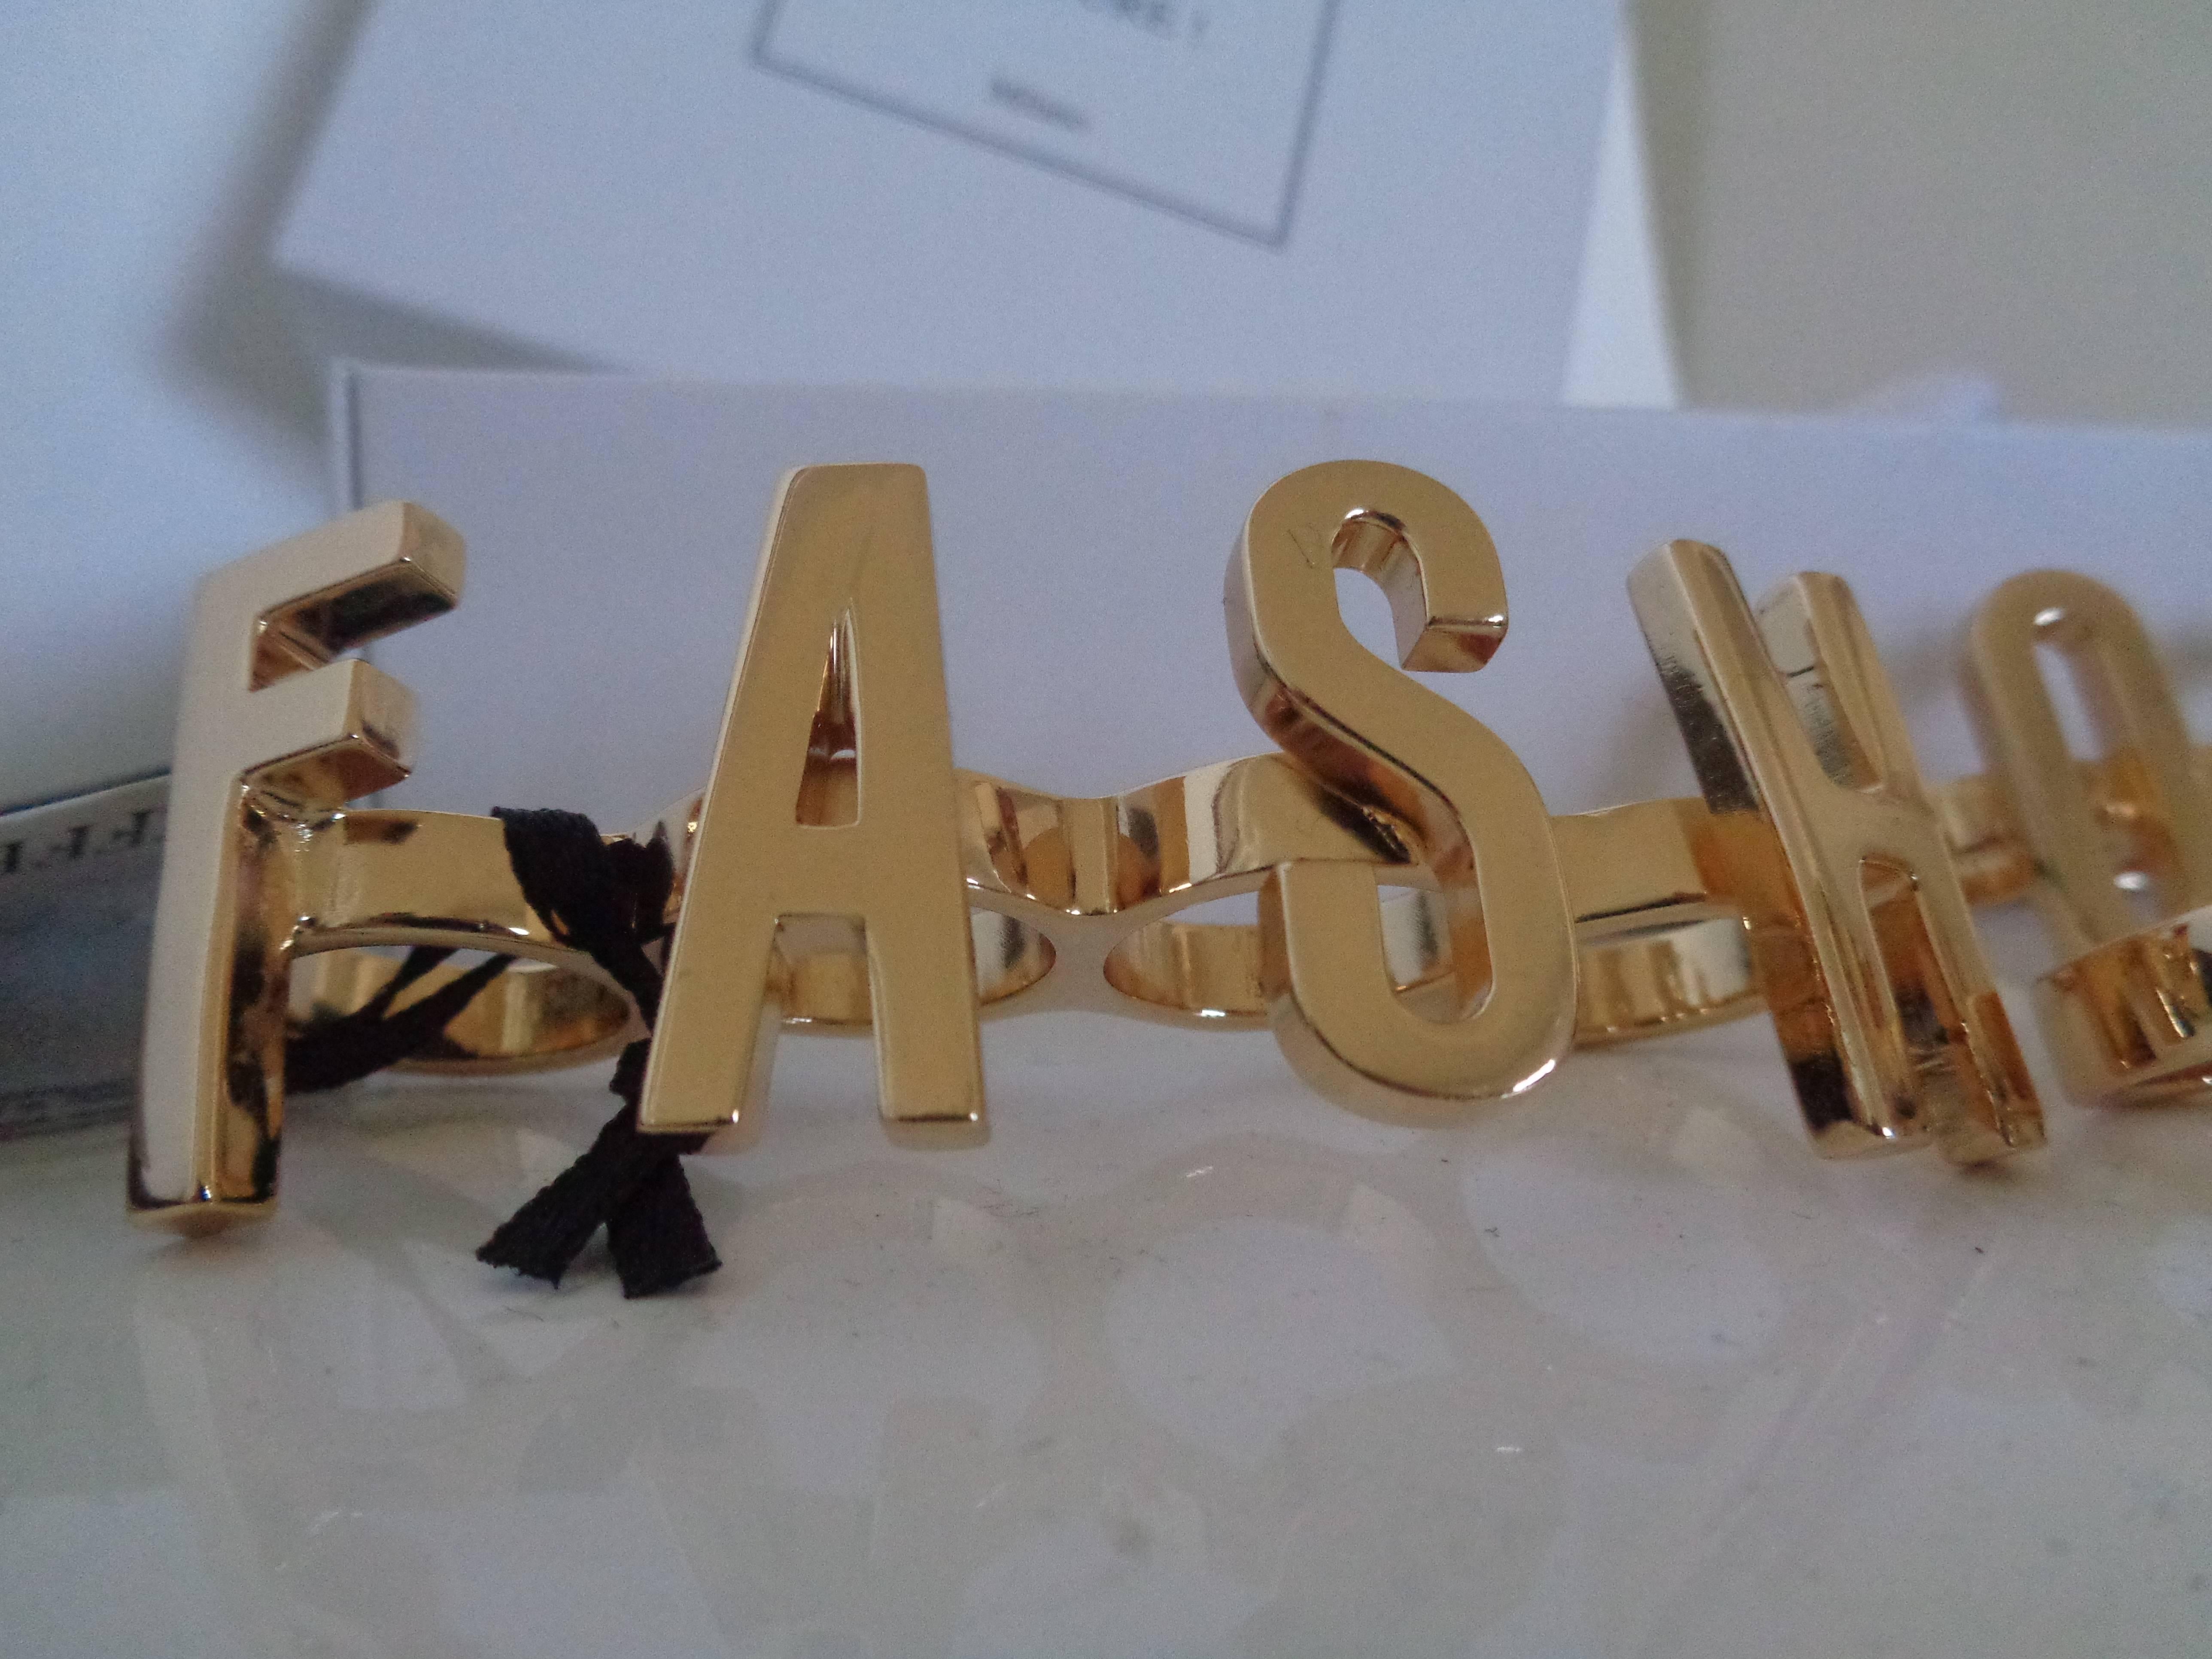 Moschino Fash On Off Rings

Can be worn as following

Fash
On
Off